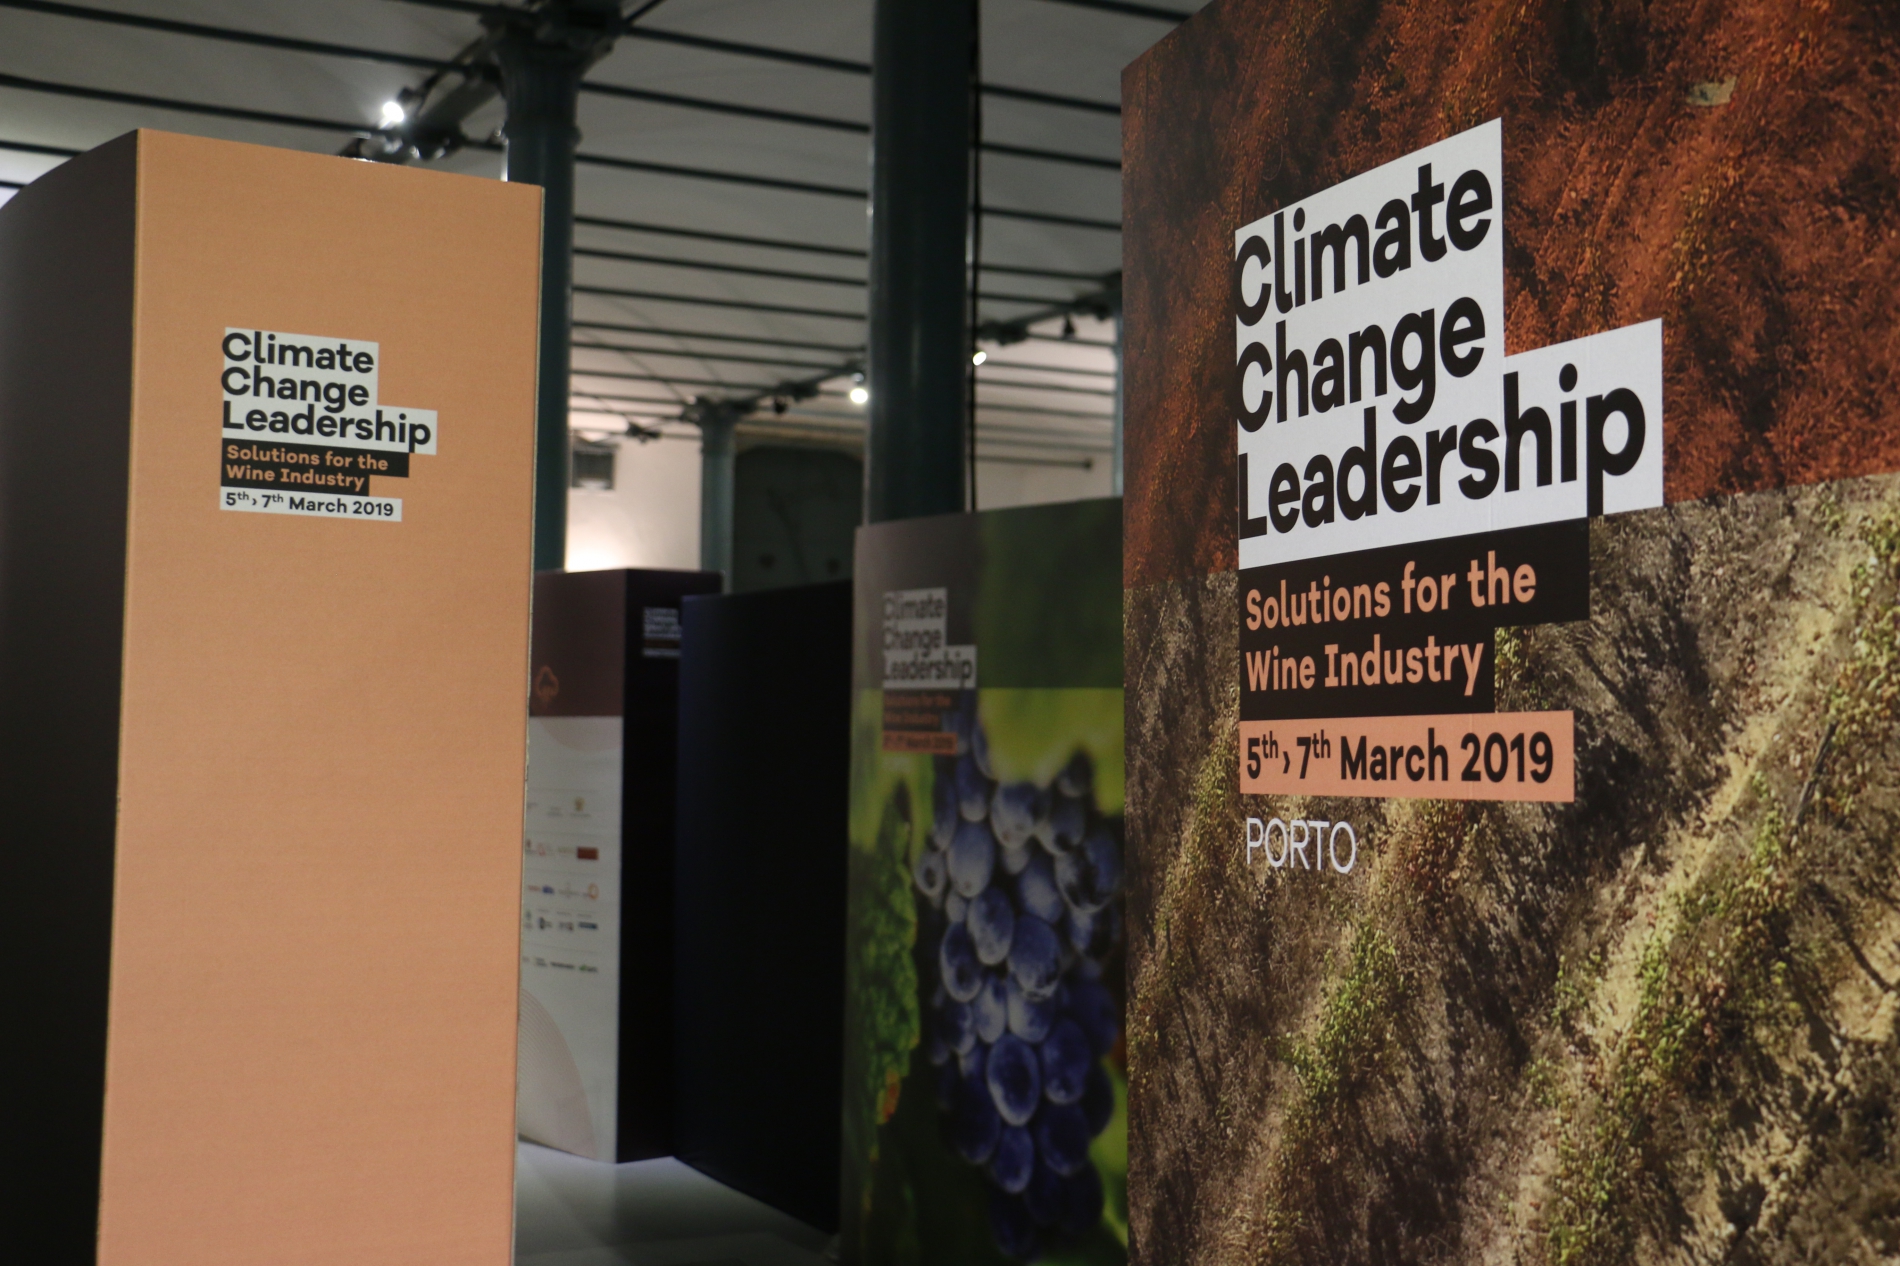 World wine leaders together to mitigate Climate Change